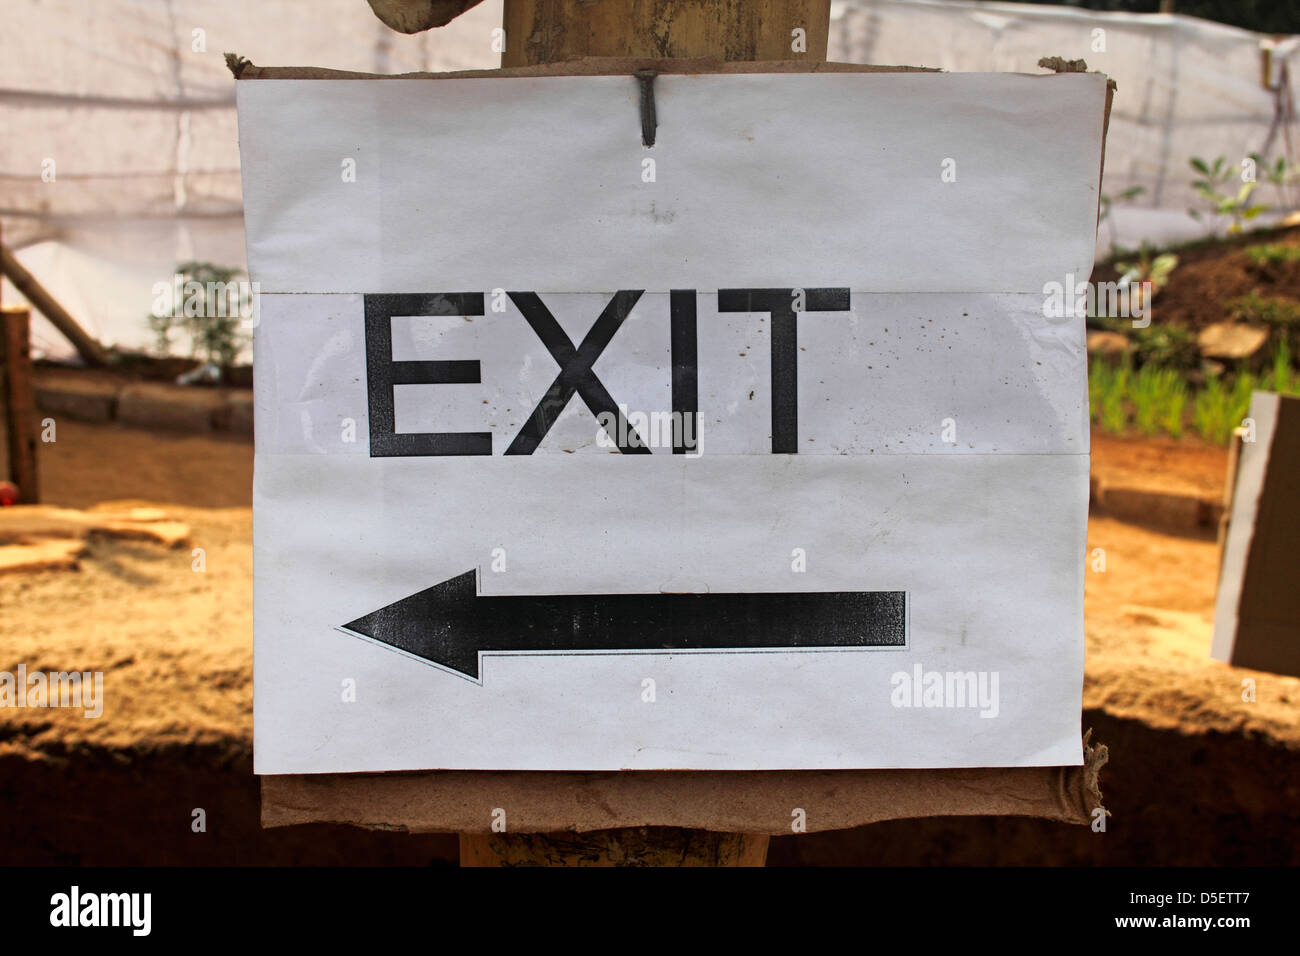 A noticeboard indicating Exit, Way Out Stock Photo